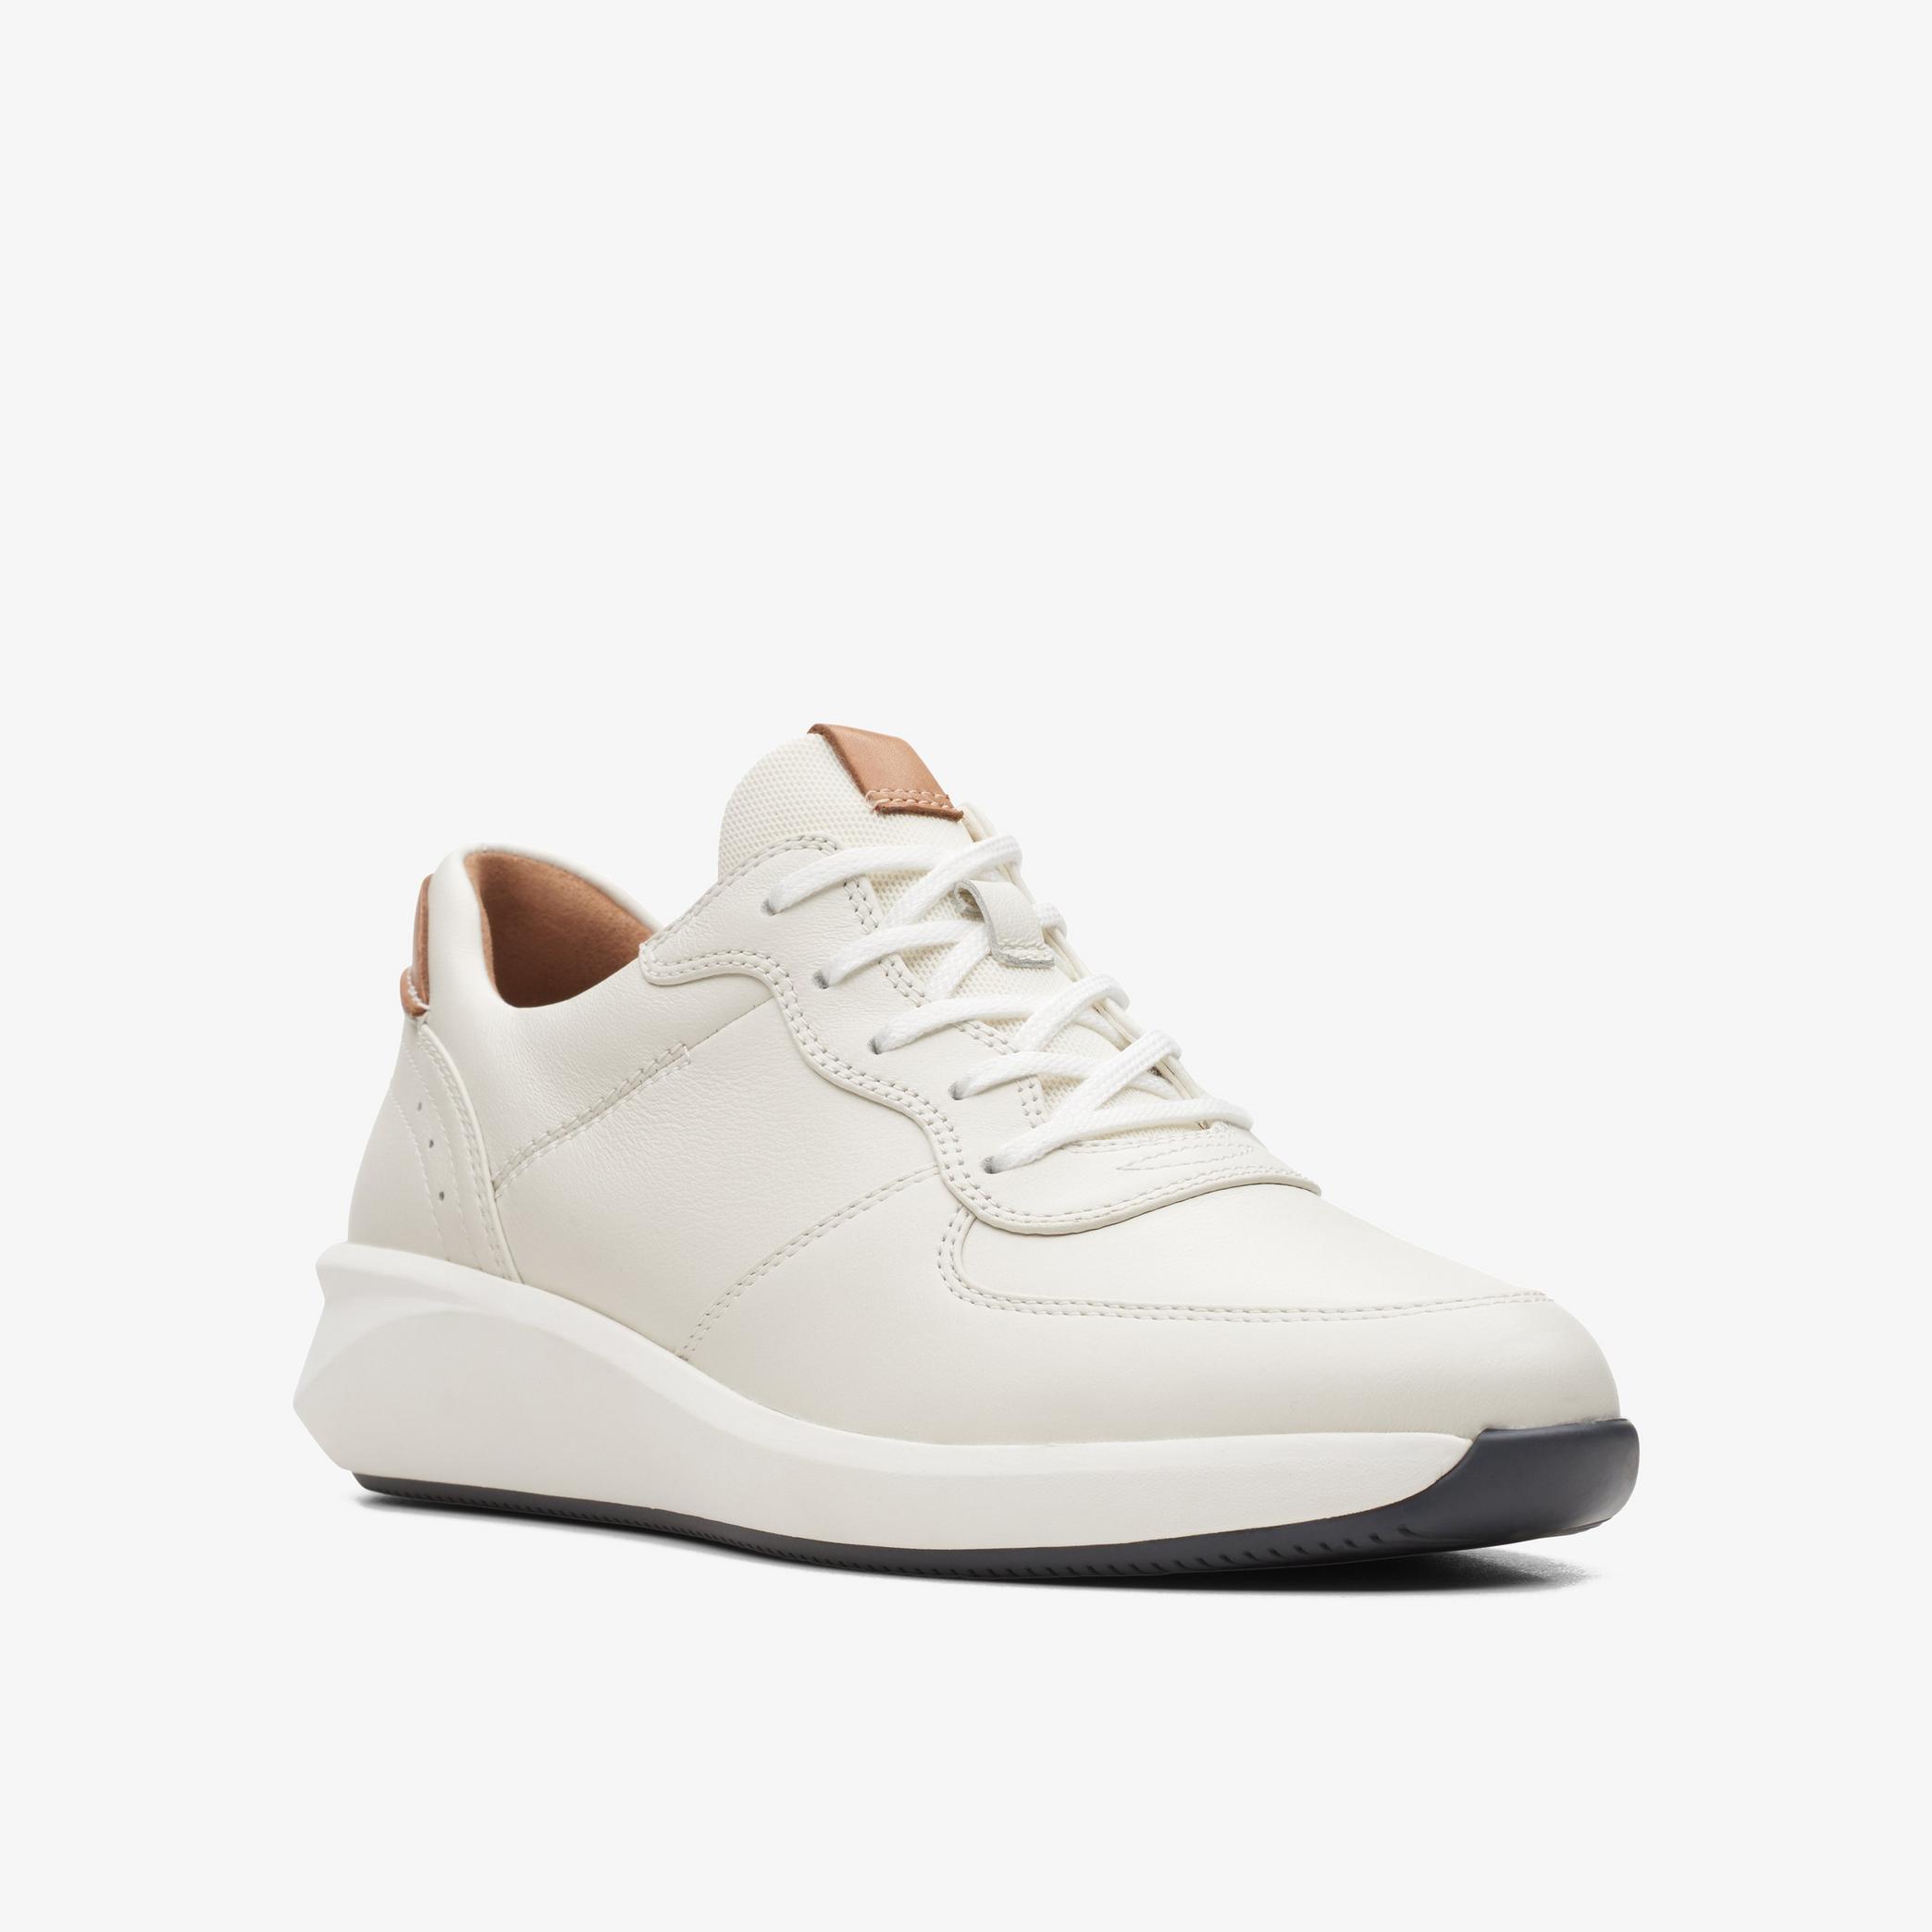 Un Rio Sprint White Combination Leather Shoes, view 3 of 6